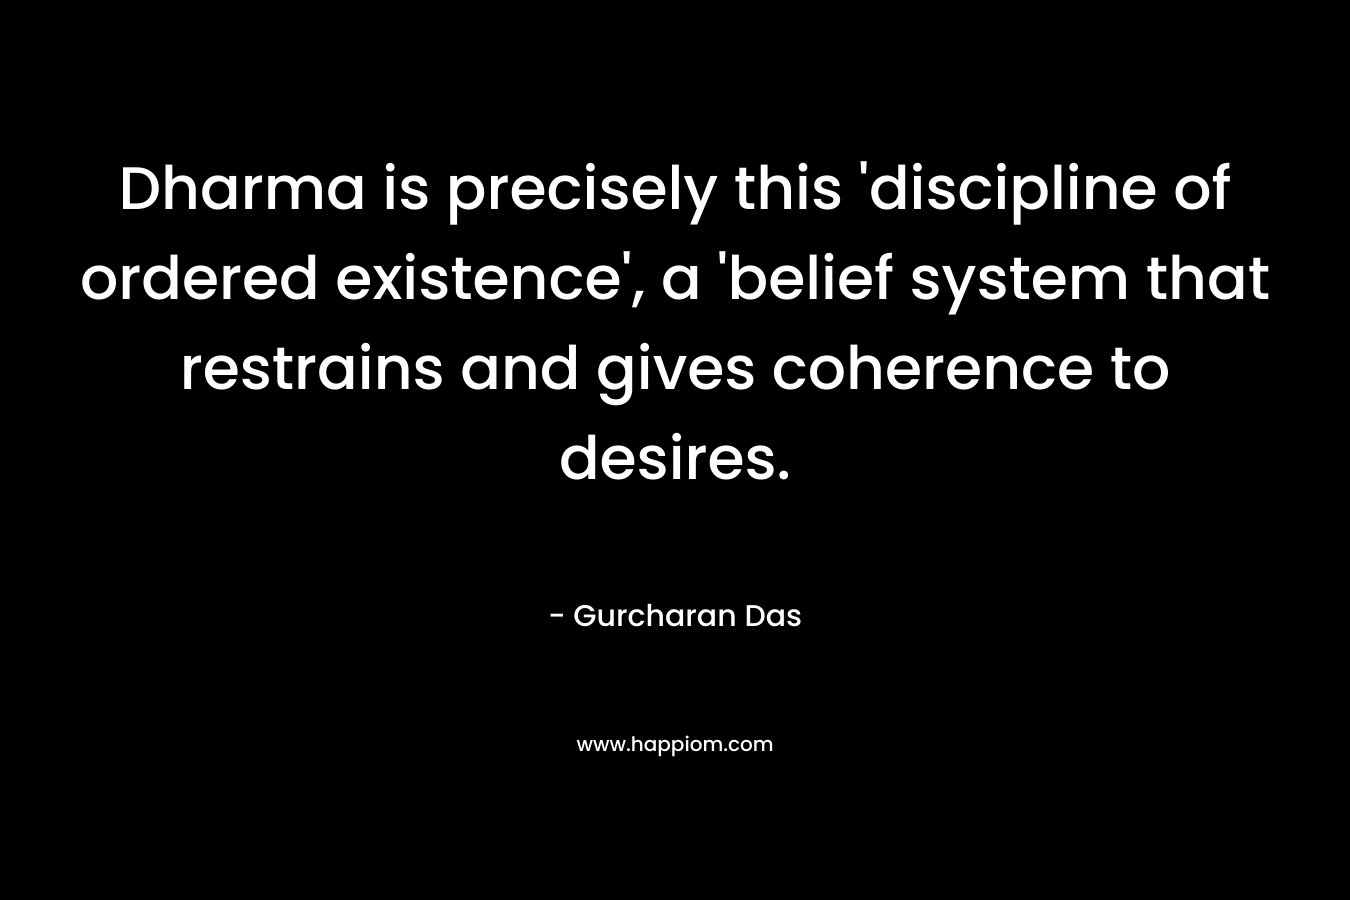 Dharma is precisely this 'discipline of ordered existence', a 'belief system that restrains and gives coherence to desires.